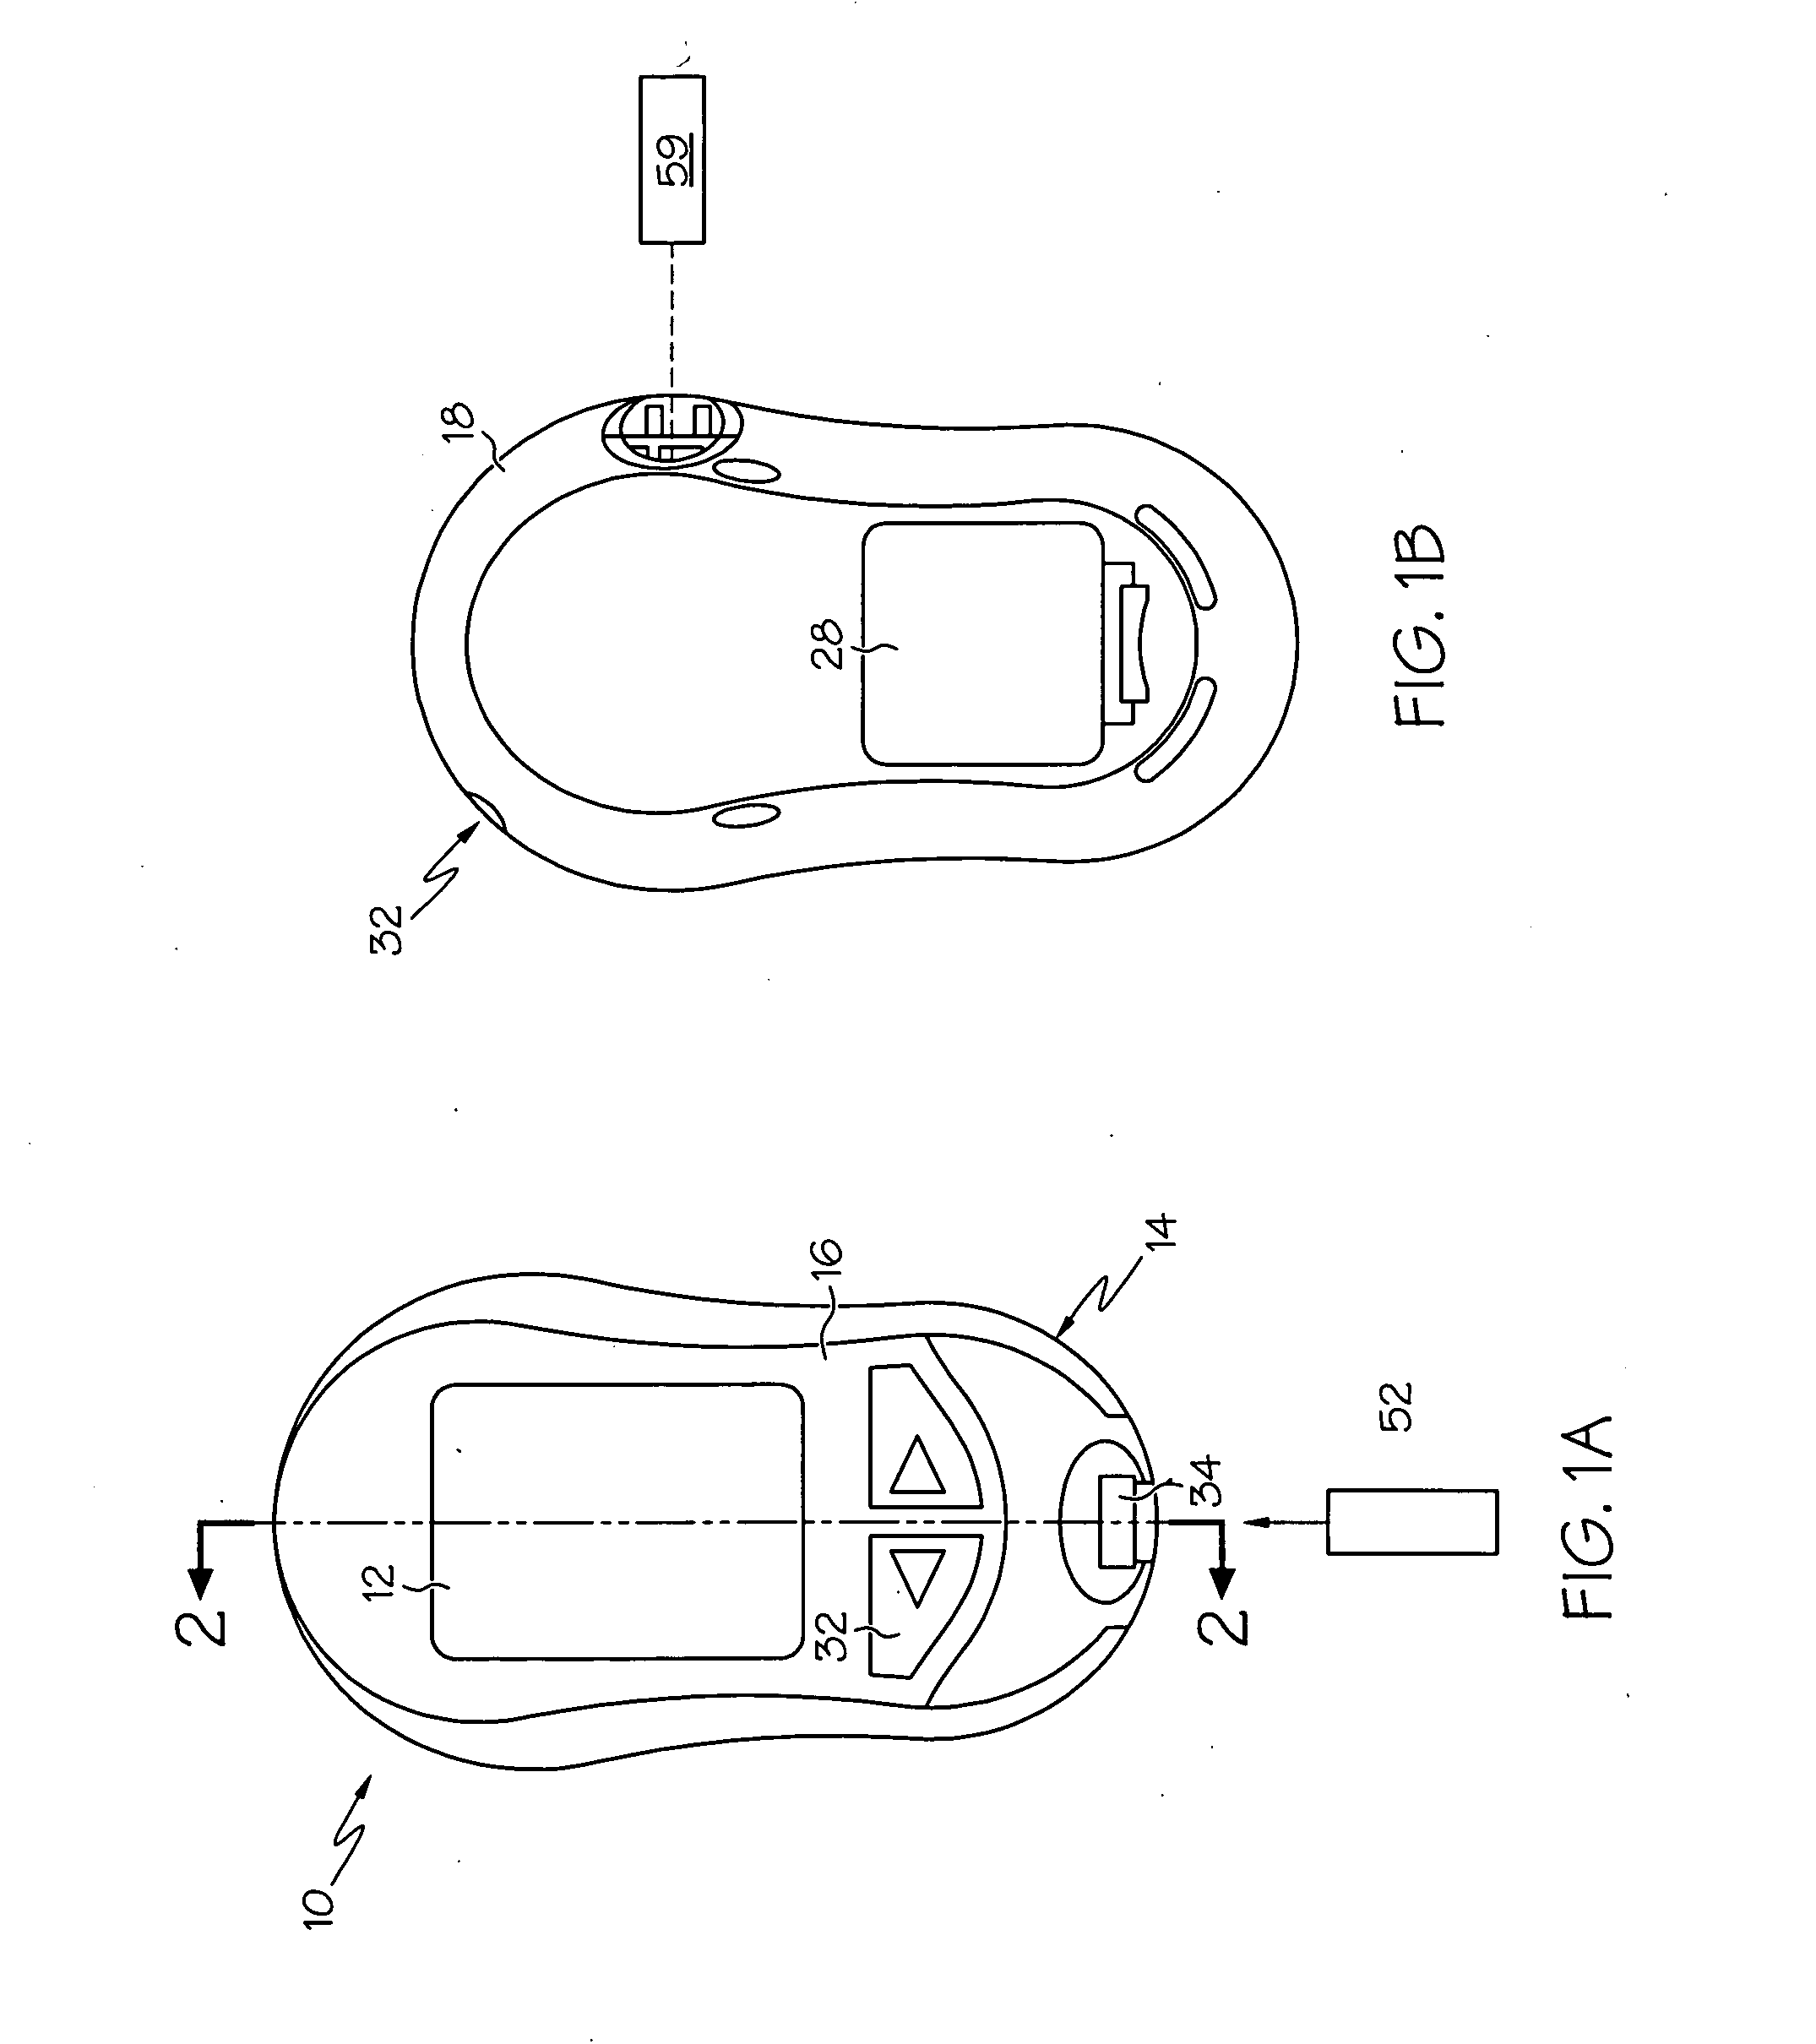 Portable handheld medical diagnostic device having a mezzanine circuit board with a universal connection interface